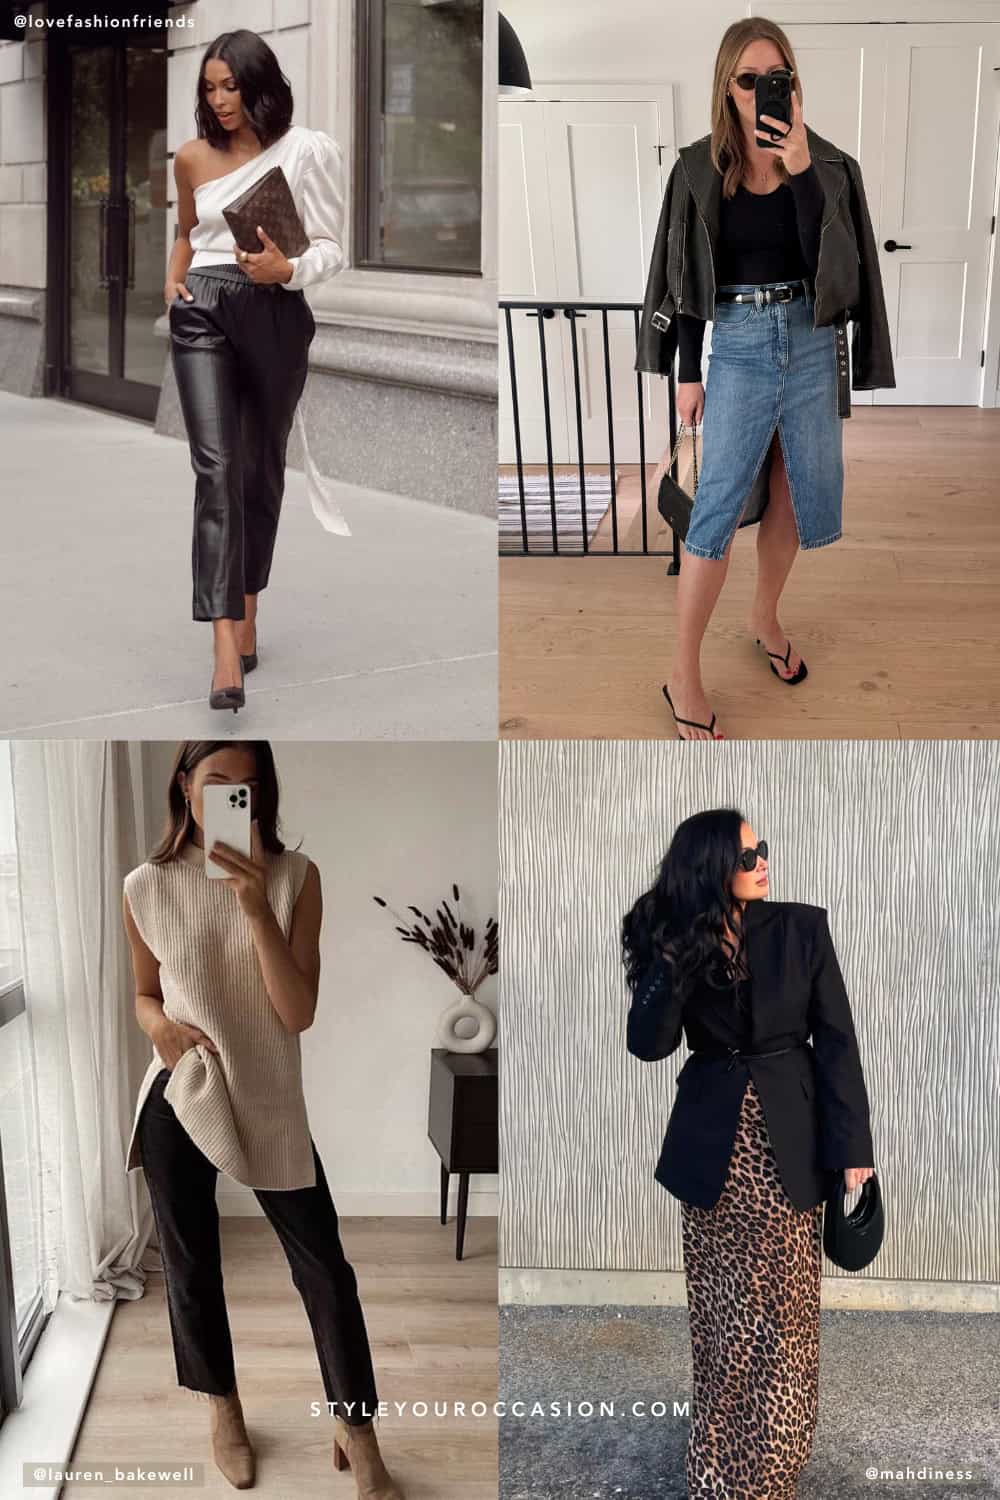 collage of four women wearing stylish fall date night outfits with leather, knits, and leopard